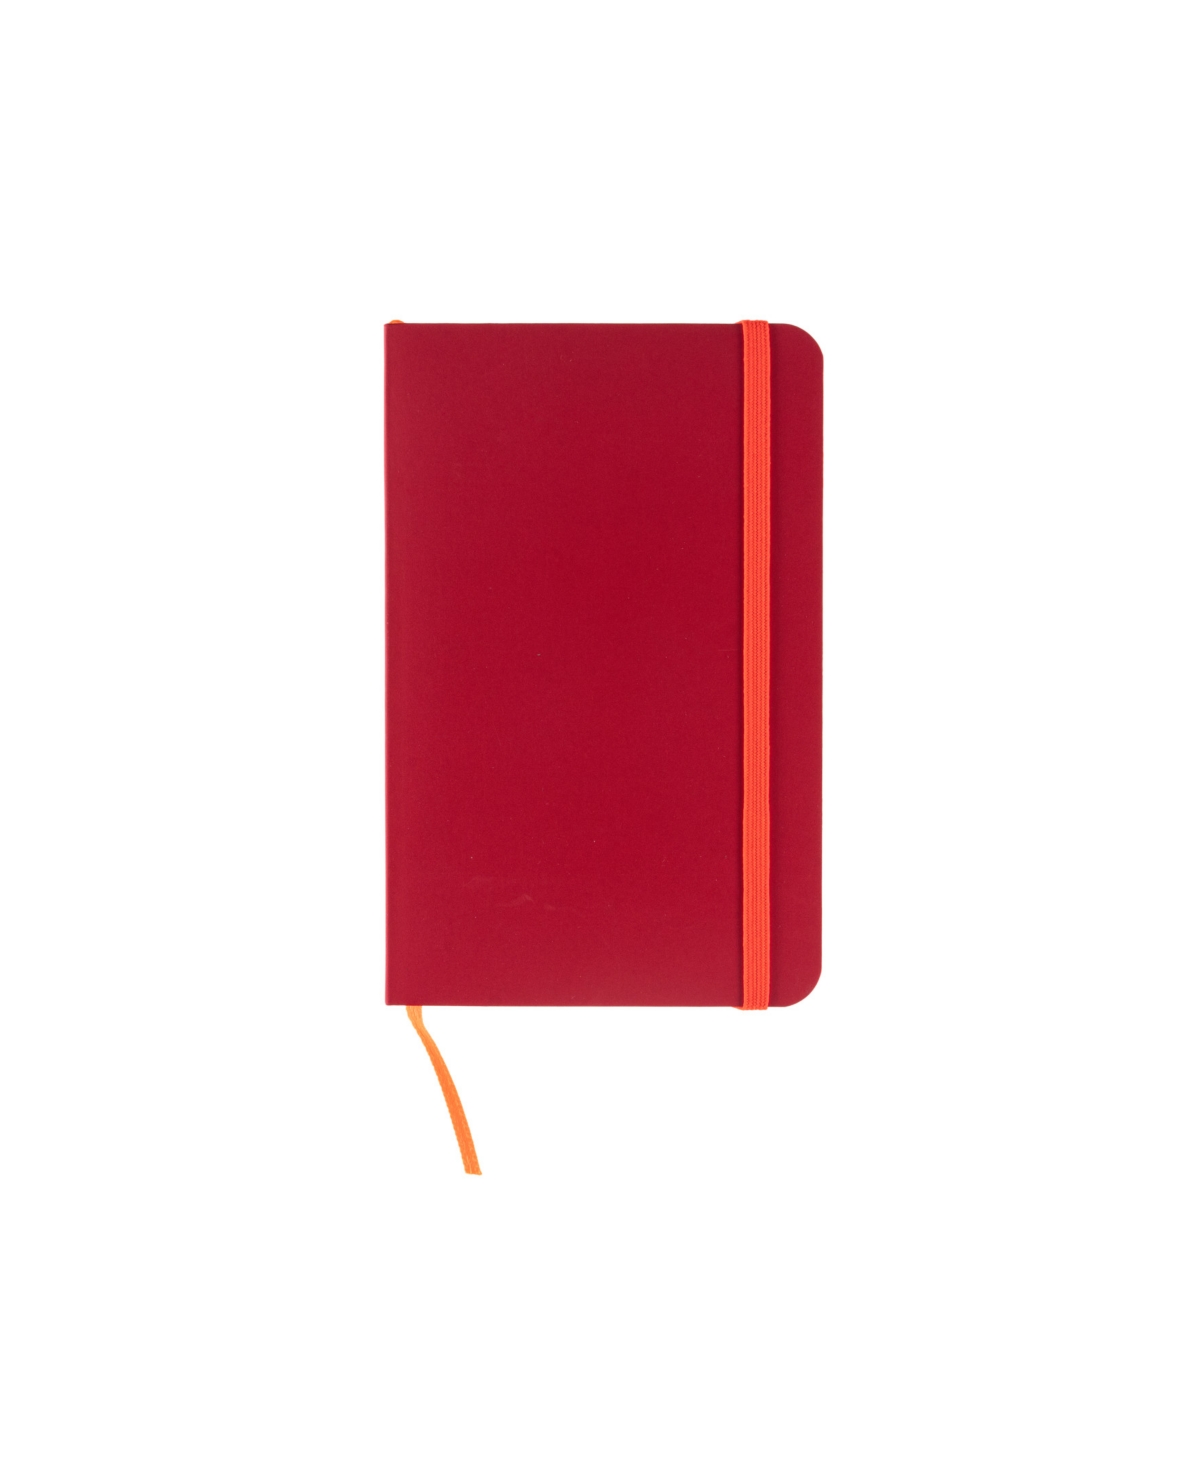 Ispira Soft Cover Lined Notebook, 3.5" x 5.5" - Red